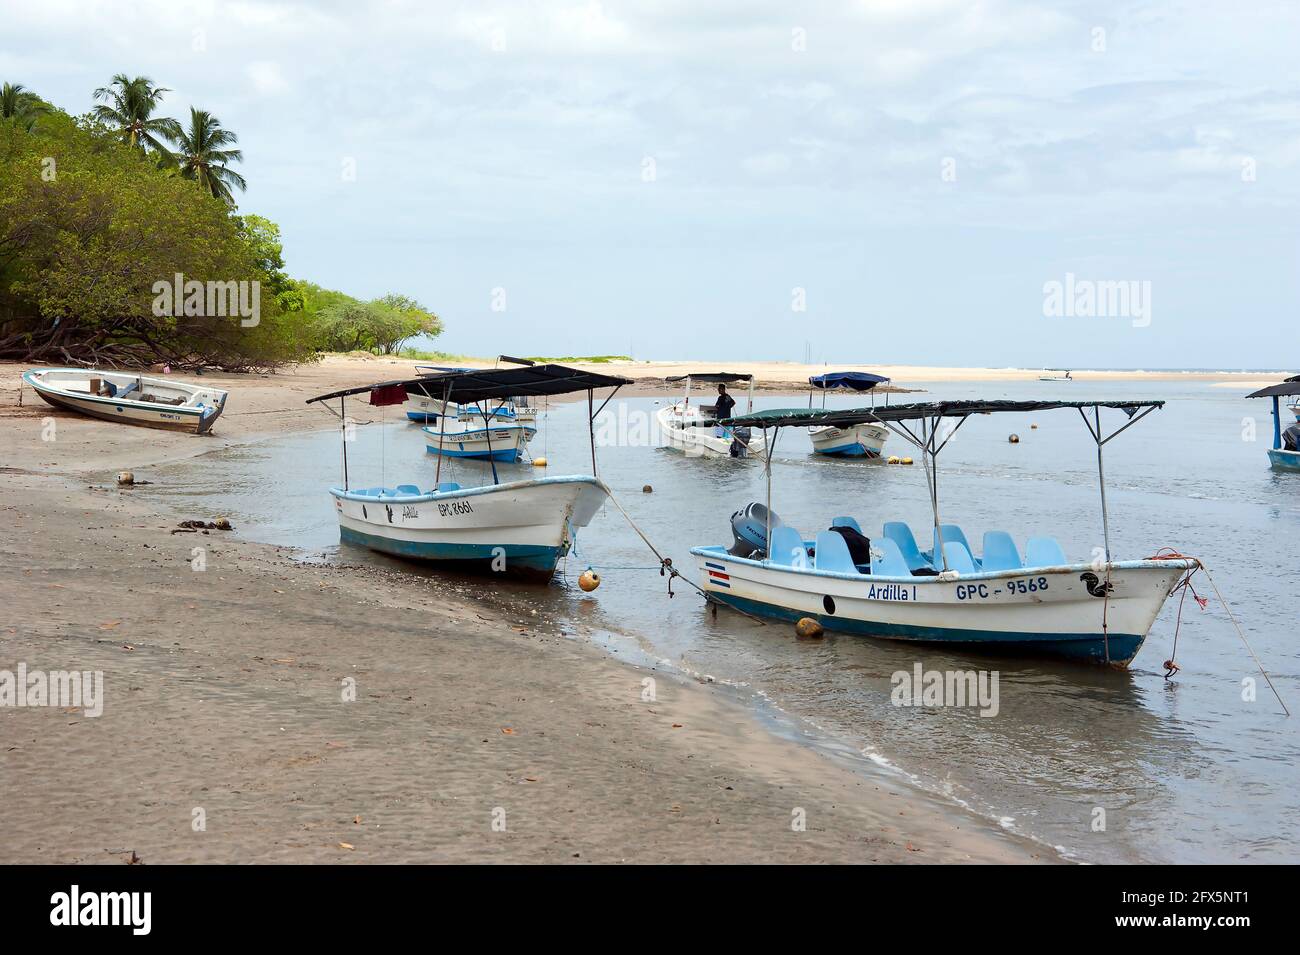 Tour boats awaiting clients at the mouth of the river at the Pacific Ocean leading into the Parque Nacional Marino Las Baulas in Tamarindo, Costa Rica. Stock Photo